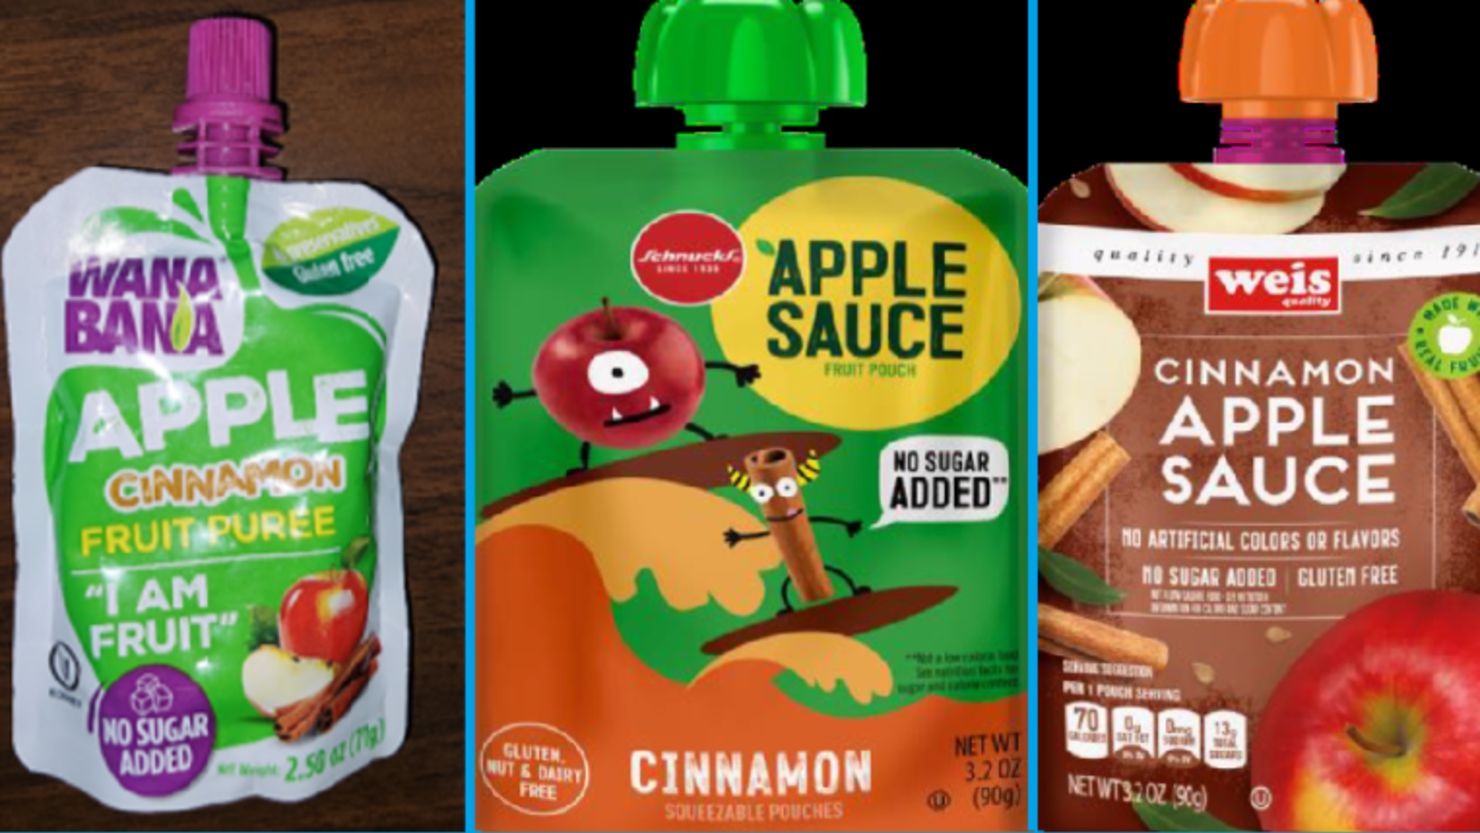 WanaBana apple cinnamon puree pouches, Schnucks-branded cinnamon applesauce pouches and variety packs and Weis-branded cinnamon applesauce pouches have been recalled.